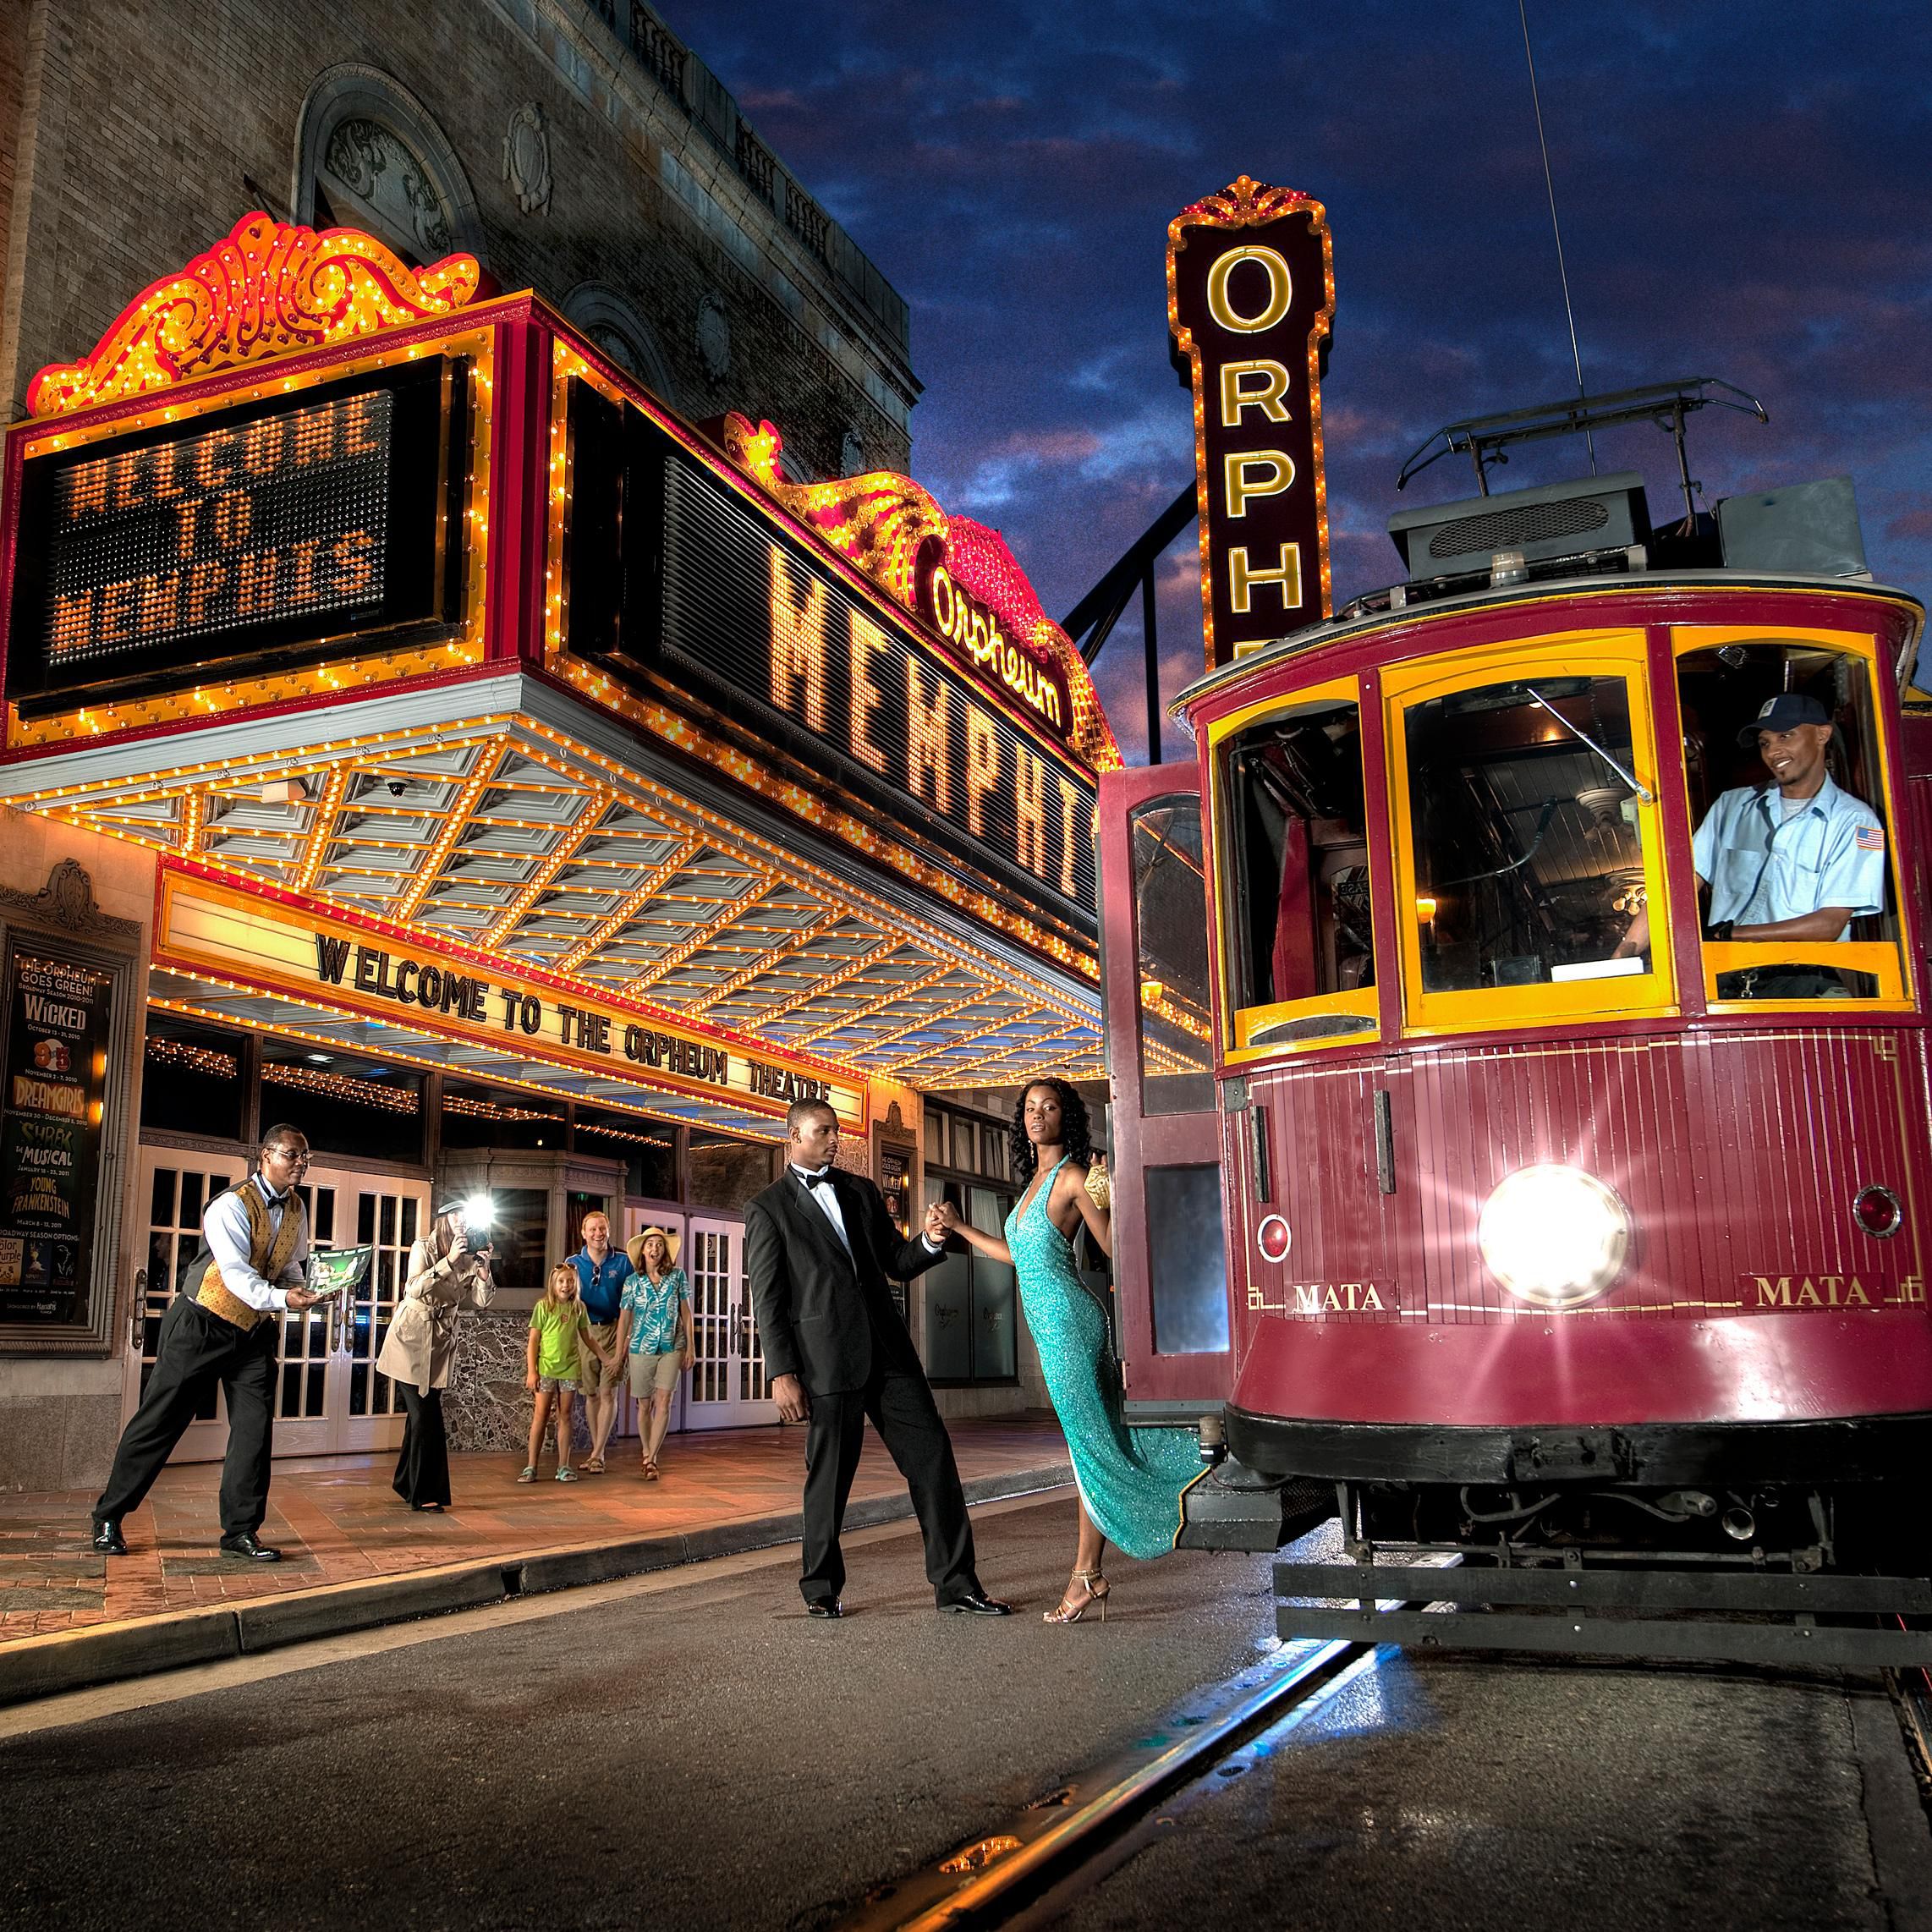 Take our free shuttle for a night out at The Orpheum Theatre